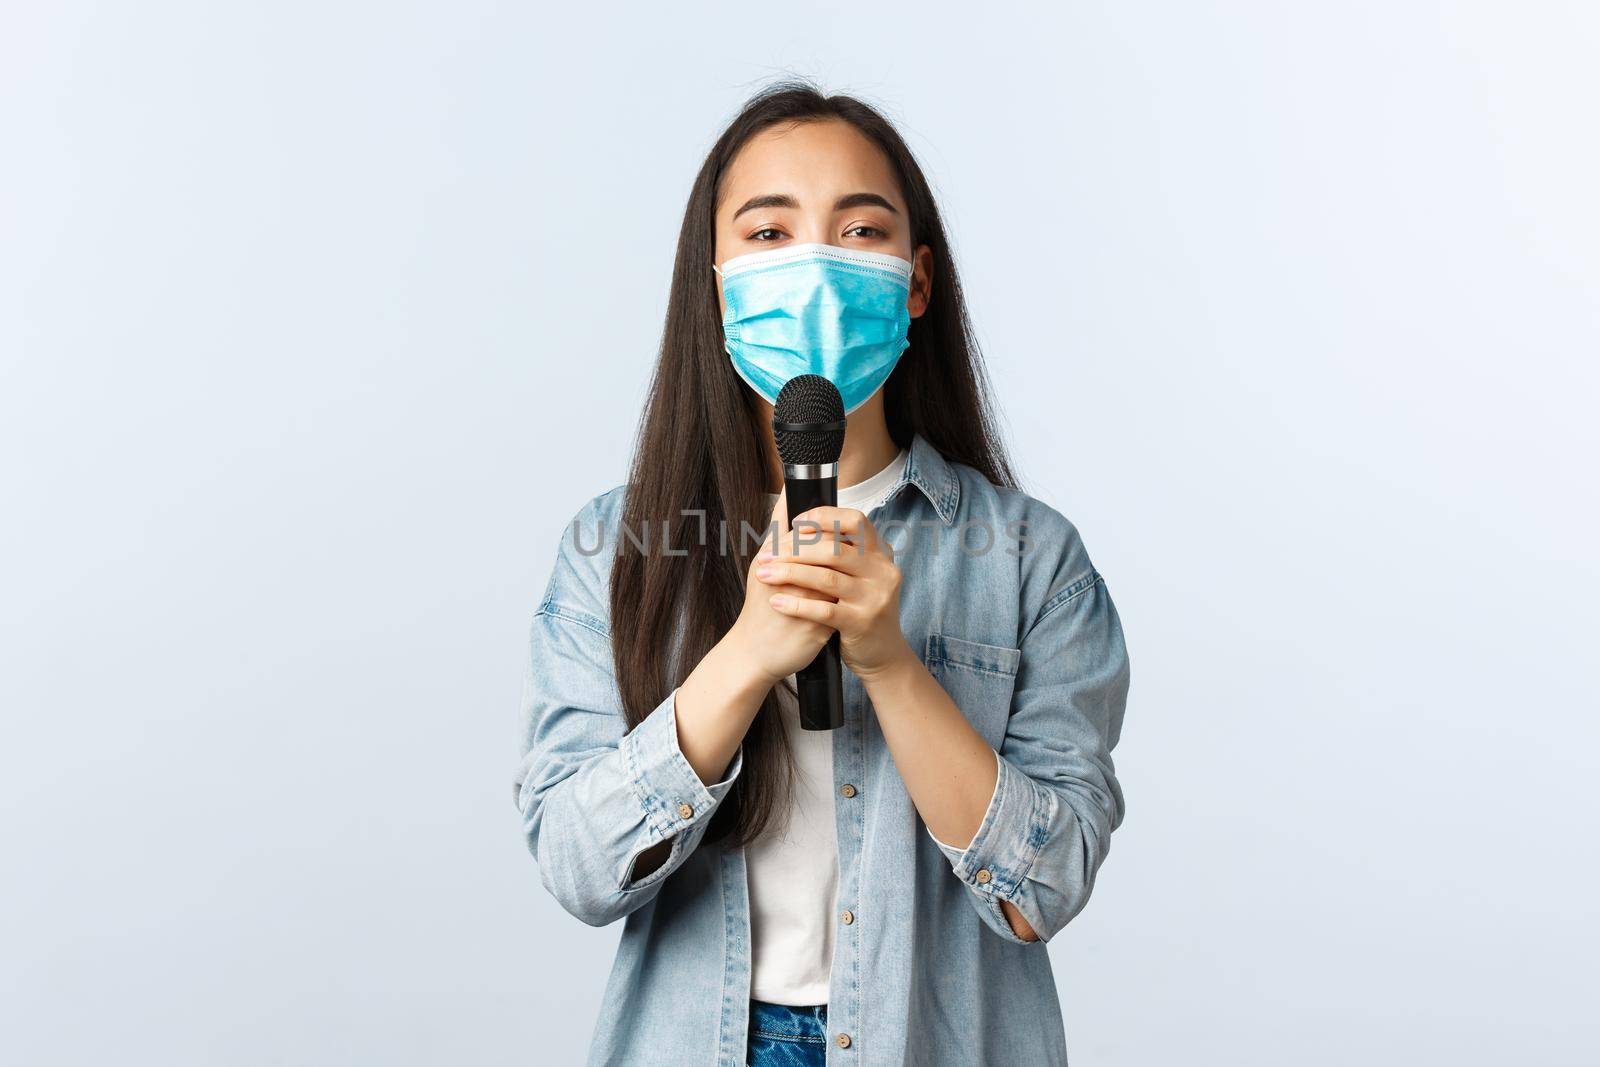 Social distancing lifestyle, covid-19 pandemic and self-isolation leisure concept. Carefree passionate asian woman in medical mask singing with microphone, close eyes delighted.